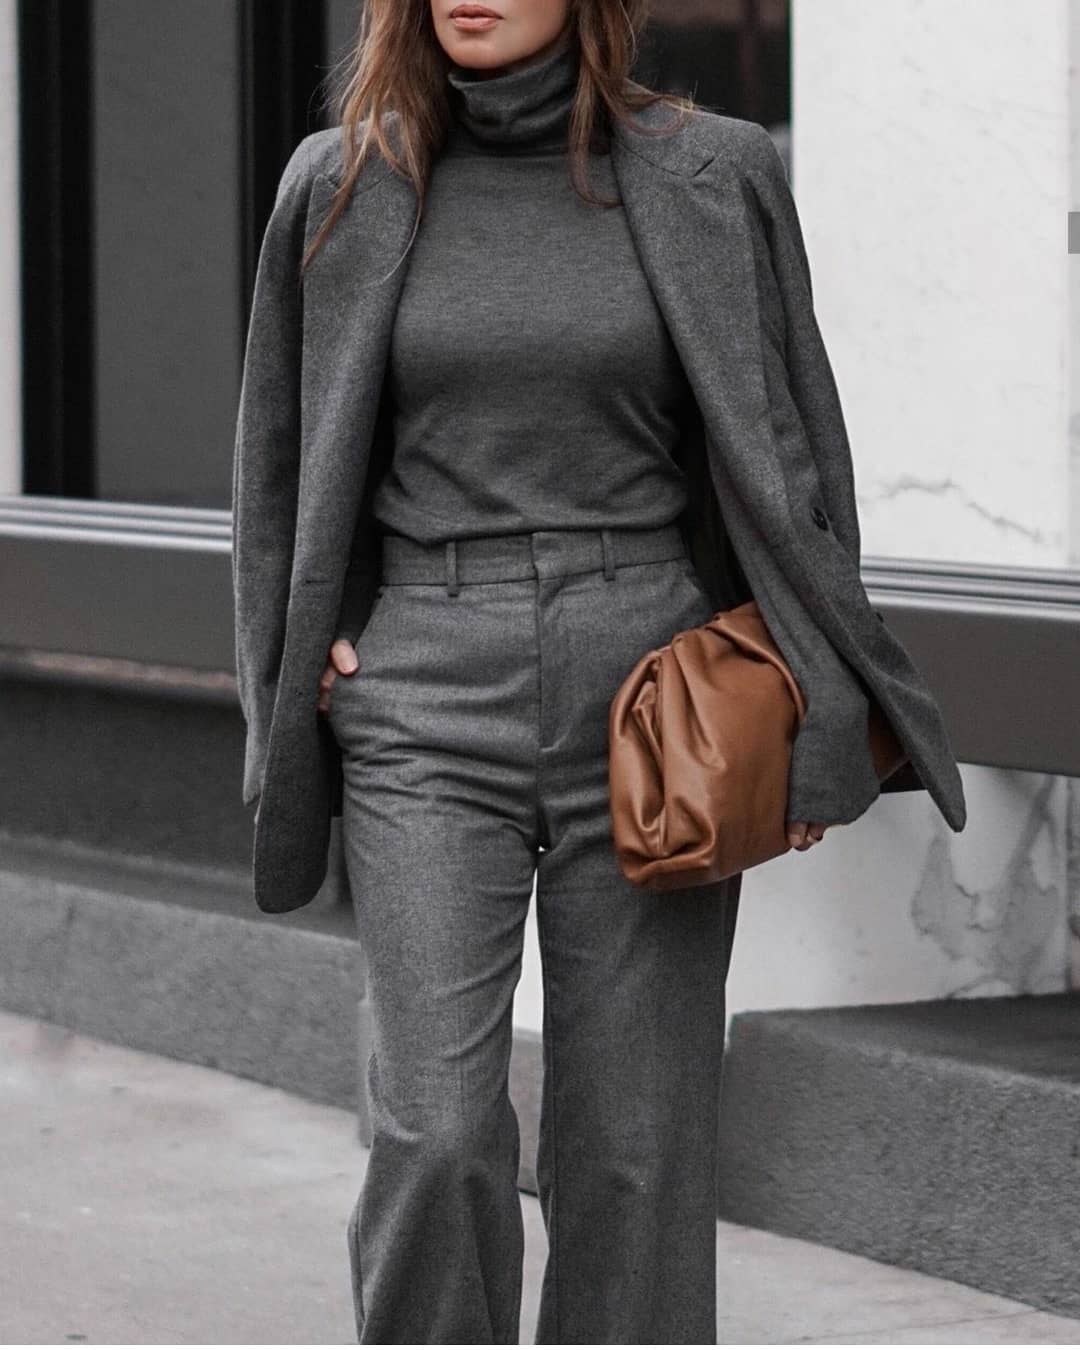 16 Must-Have Grey Pieces to Wear to Work